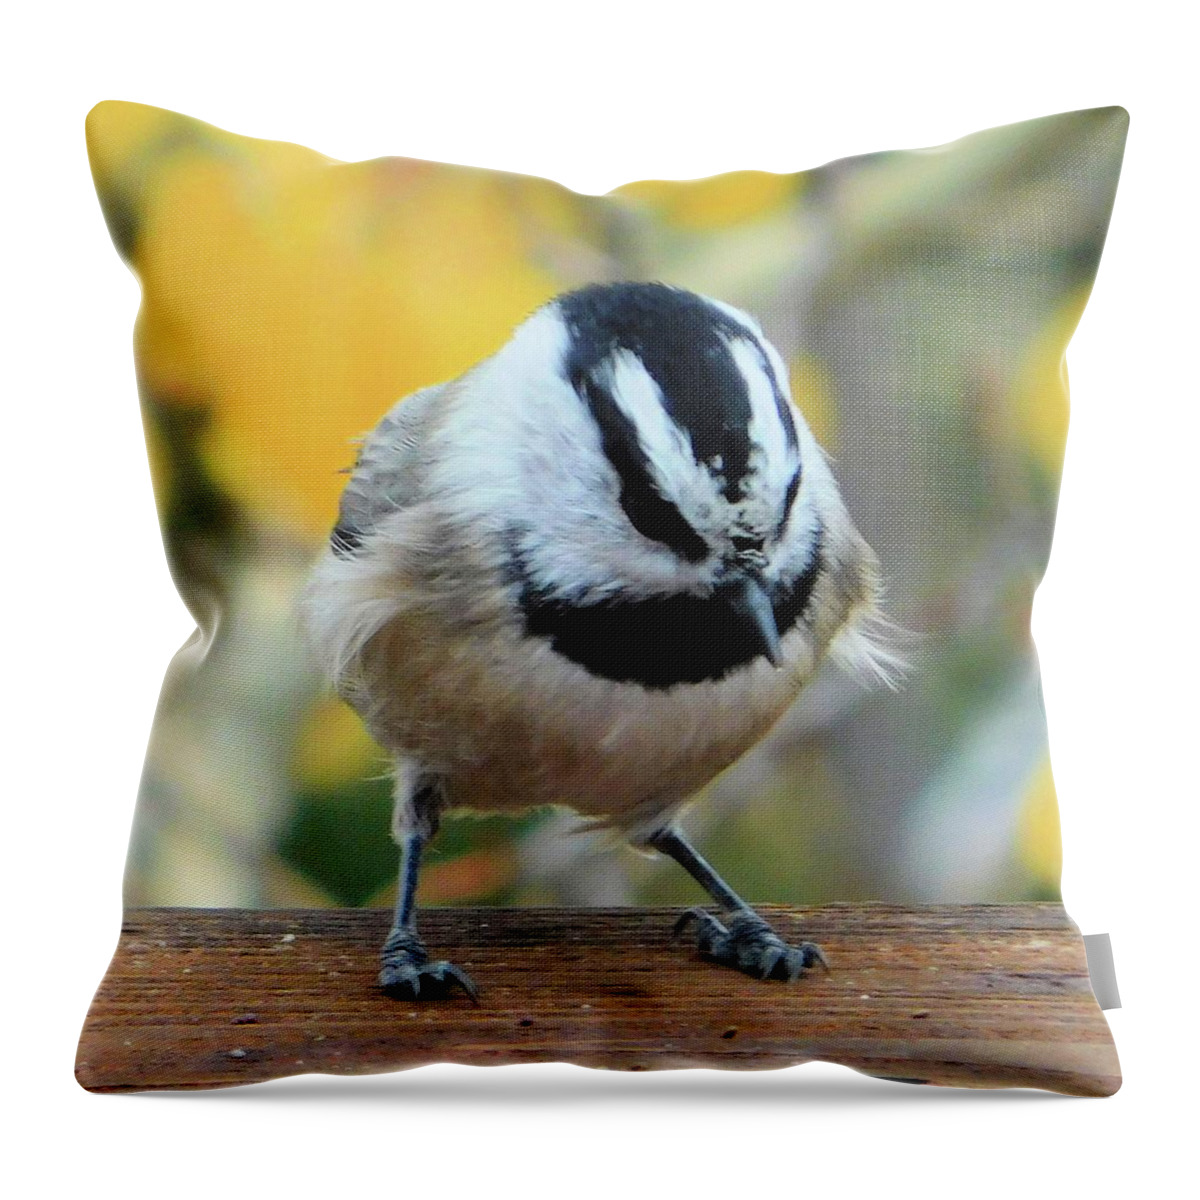 Birds Throw Pillow featuring the photograph Ruffled Feathers by Karen Stansberry